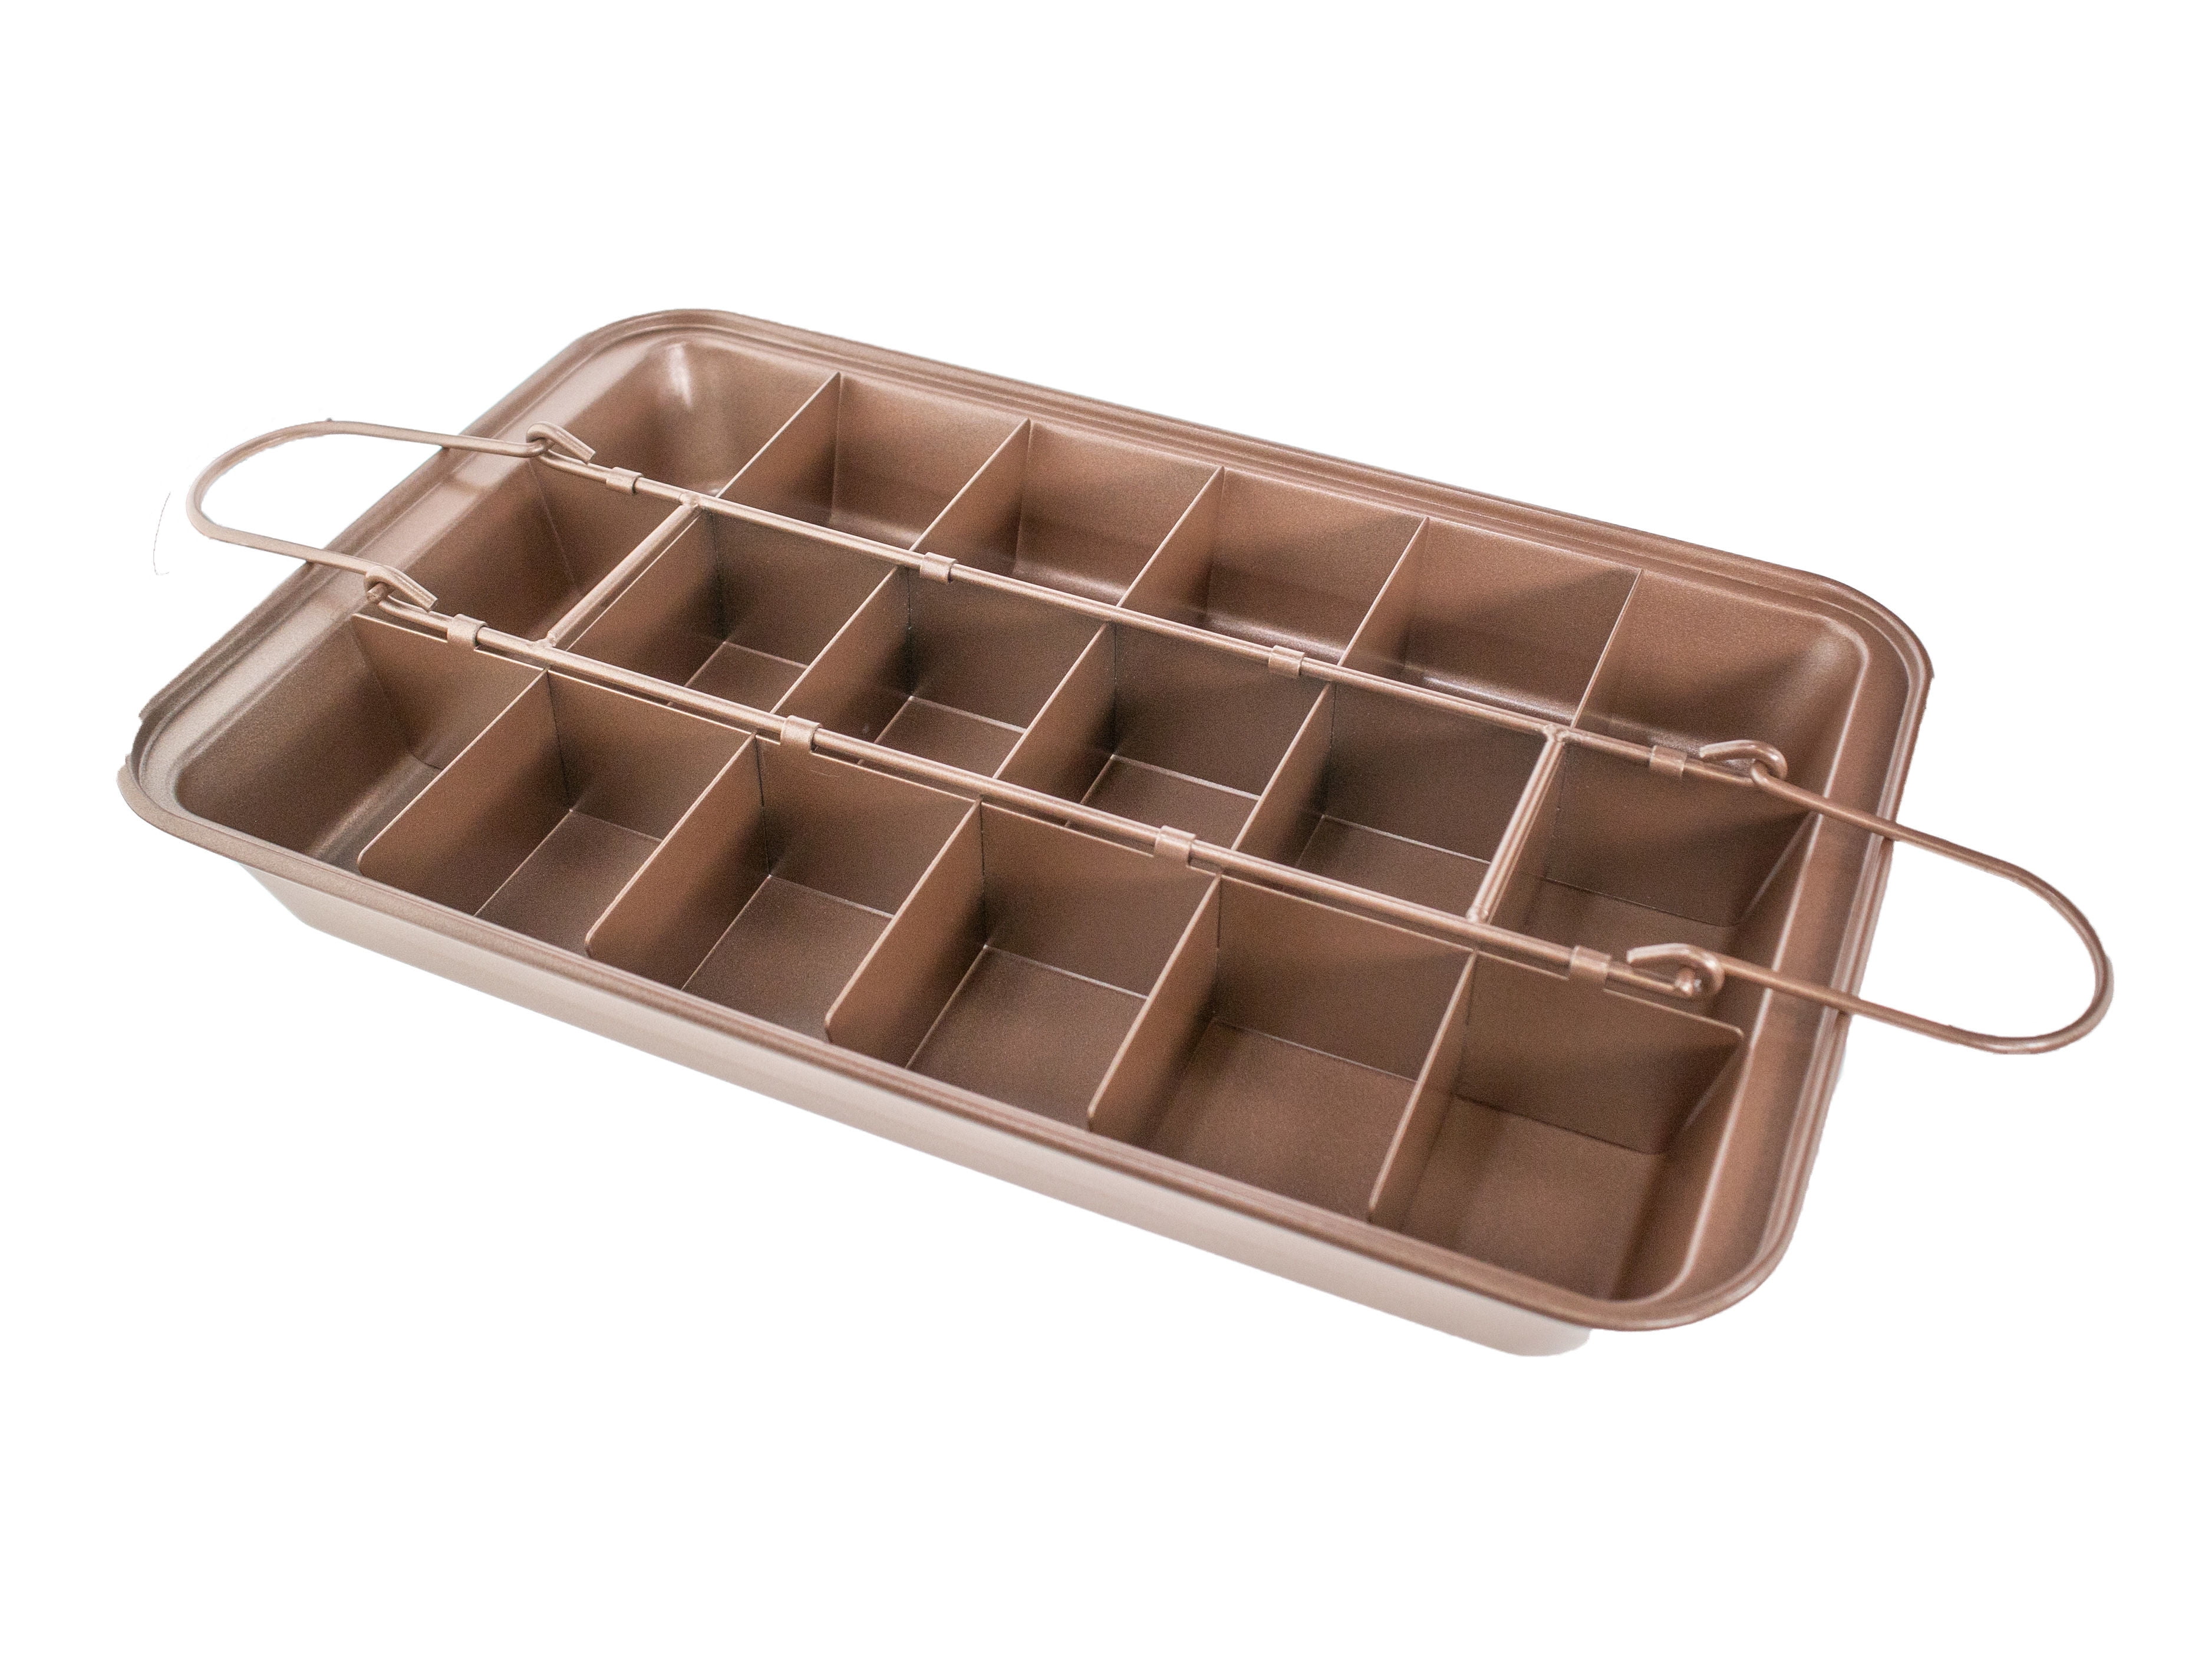 Range Kleen 9 in. Round Non-Stick Cake Pan at Tractor Supply Co.